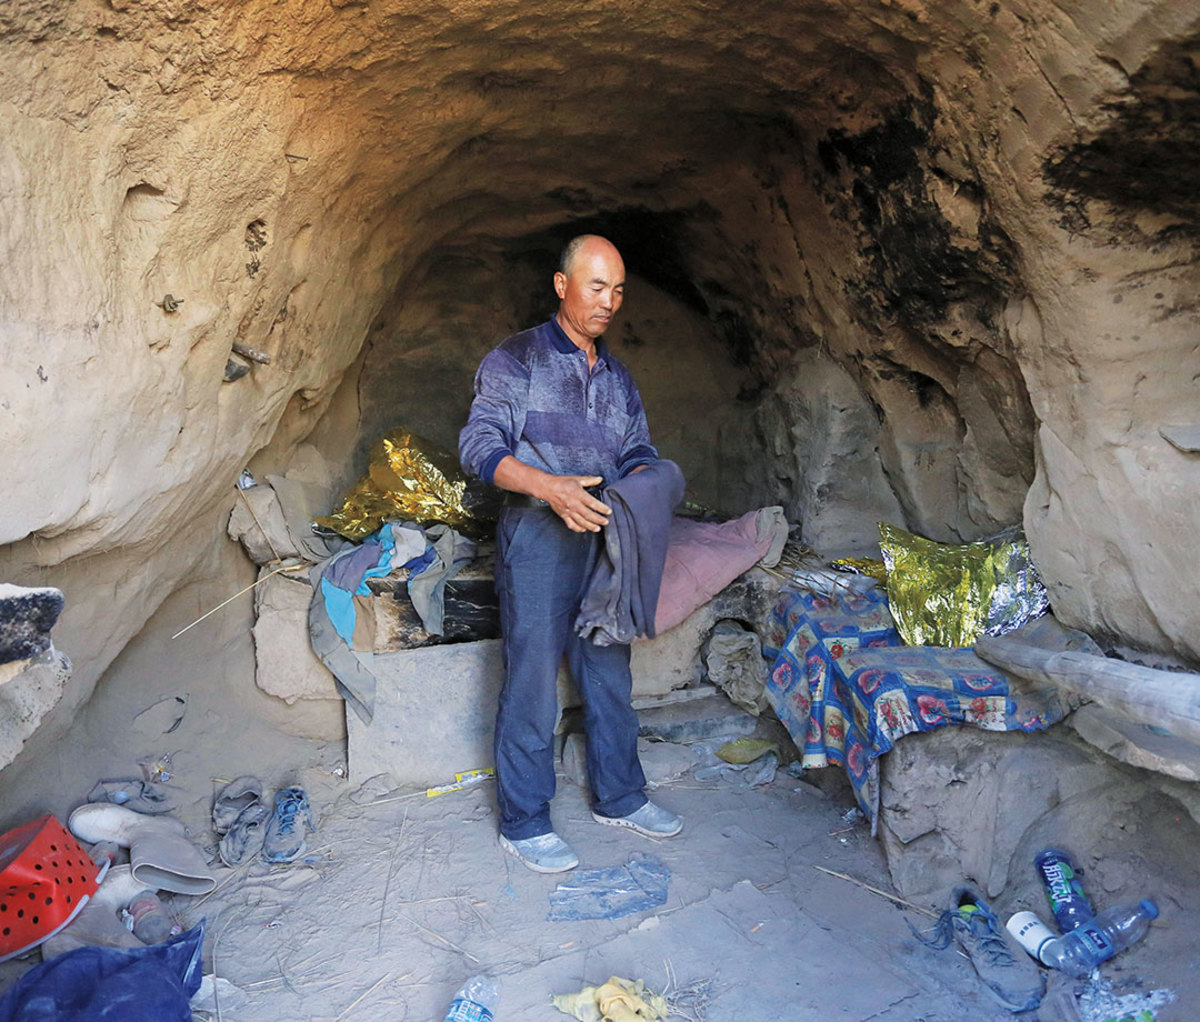 Man in cave surrounded by water bottles and debris